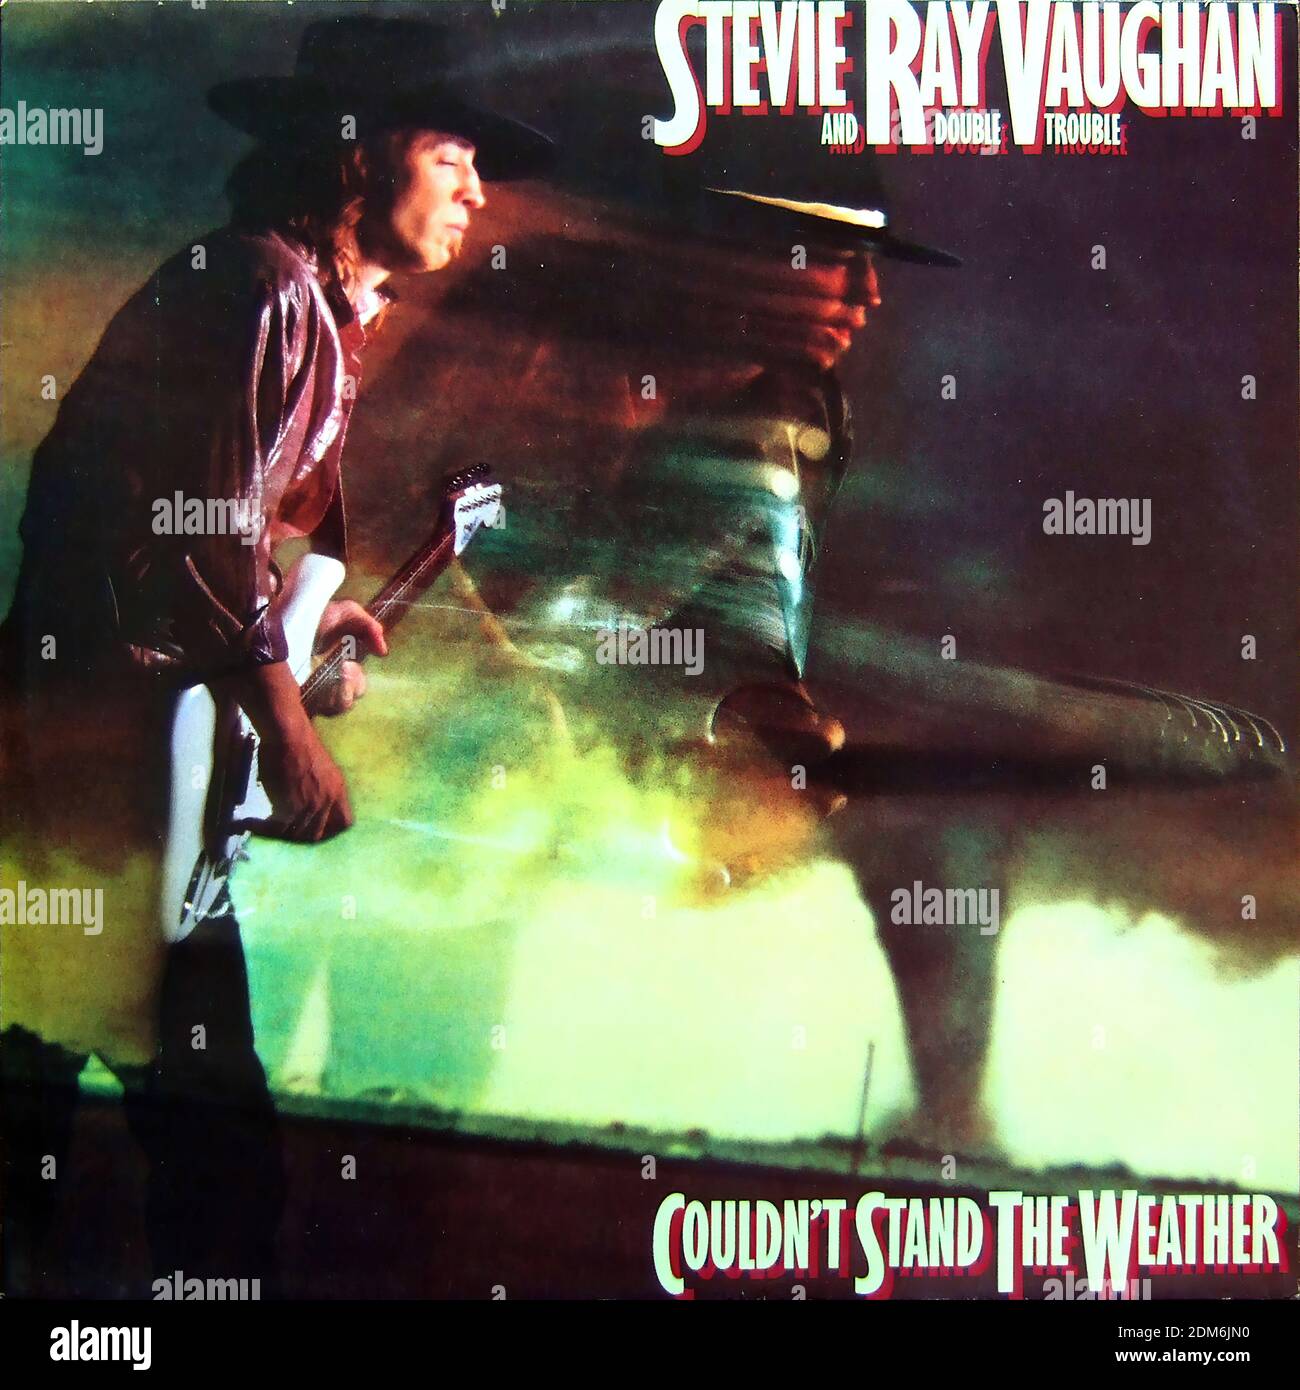 Stevie Ray Vaughan - Couldn't Stand The Weather - Vintage vinyl album cover Stock Photo